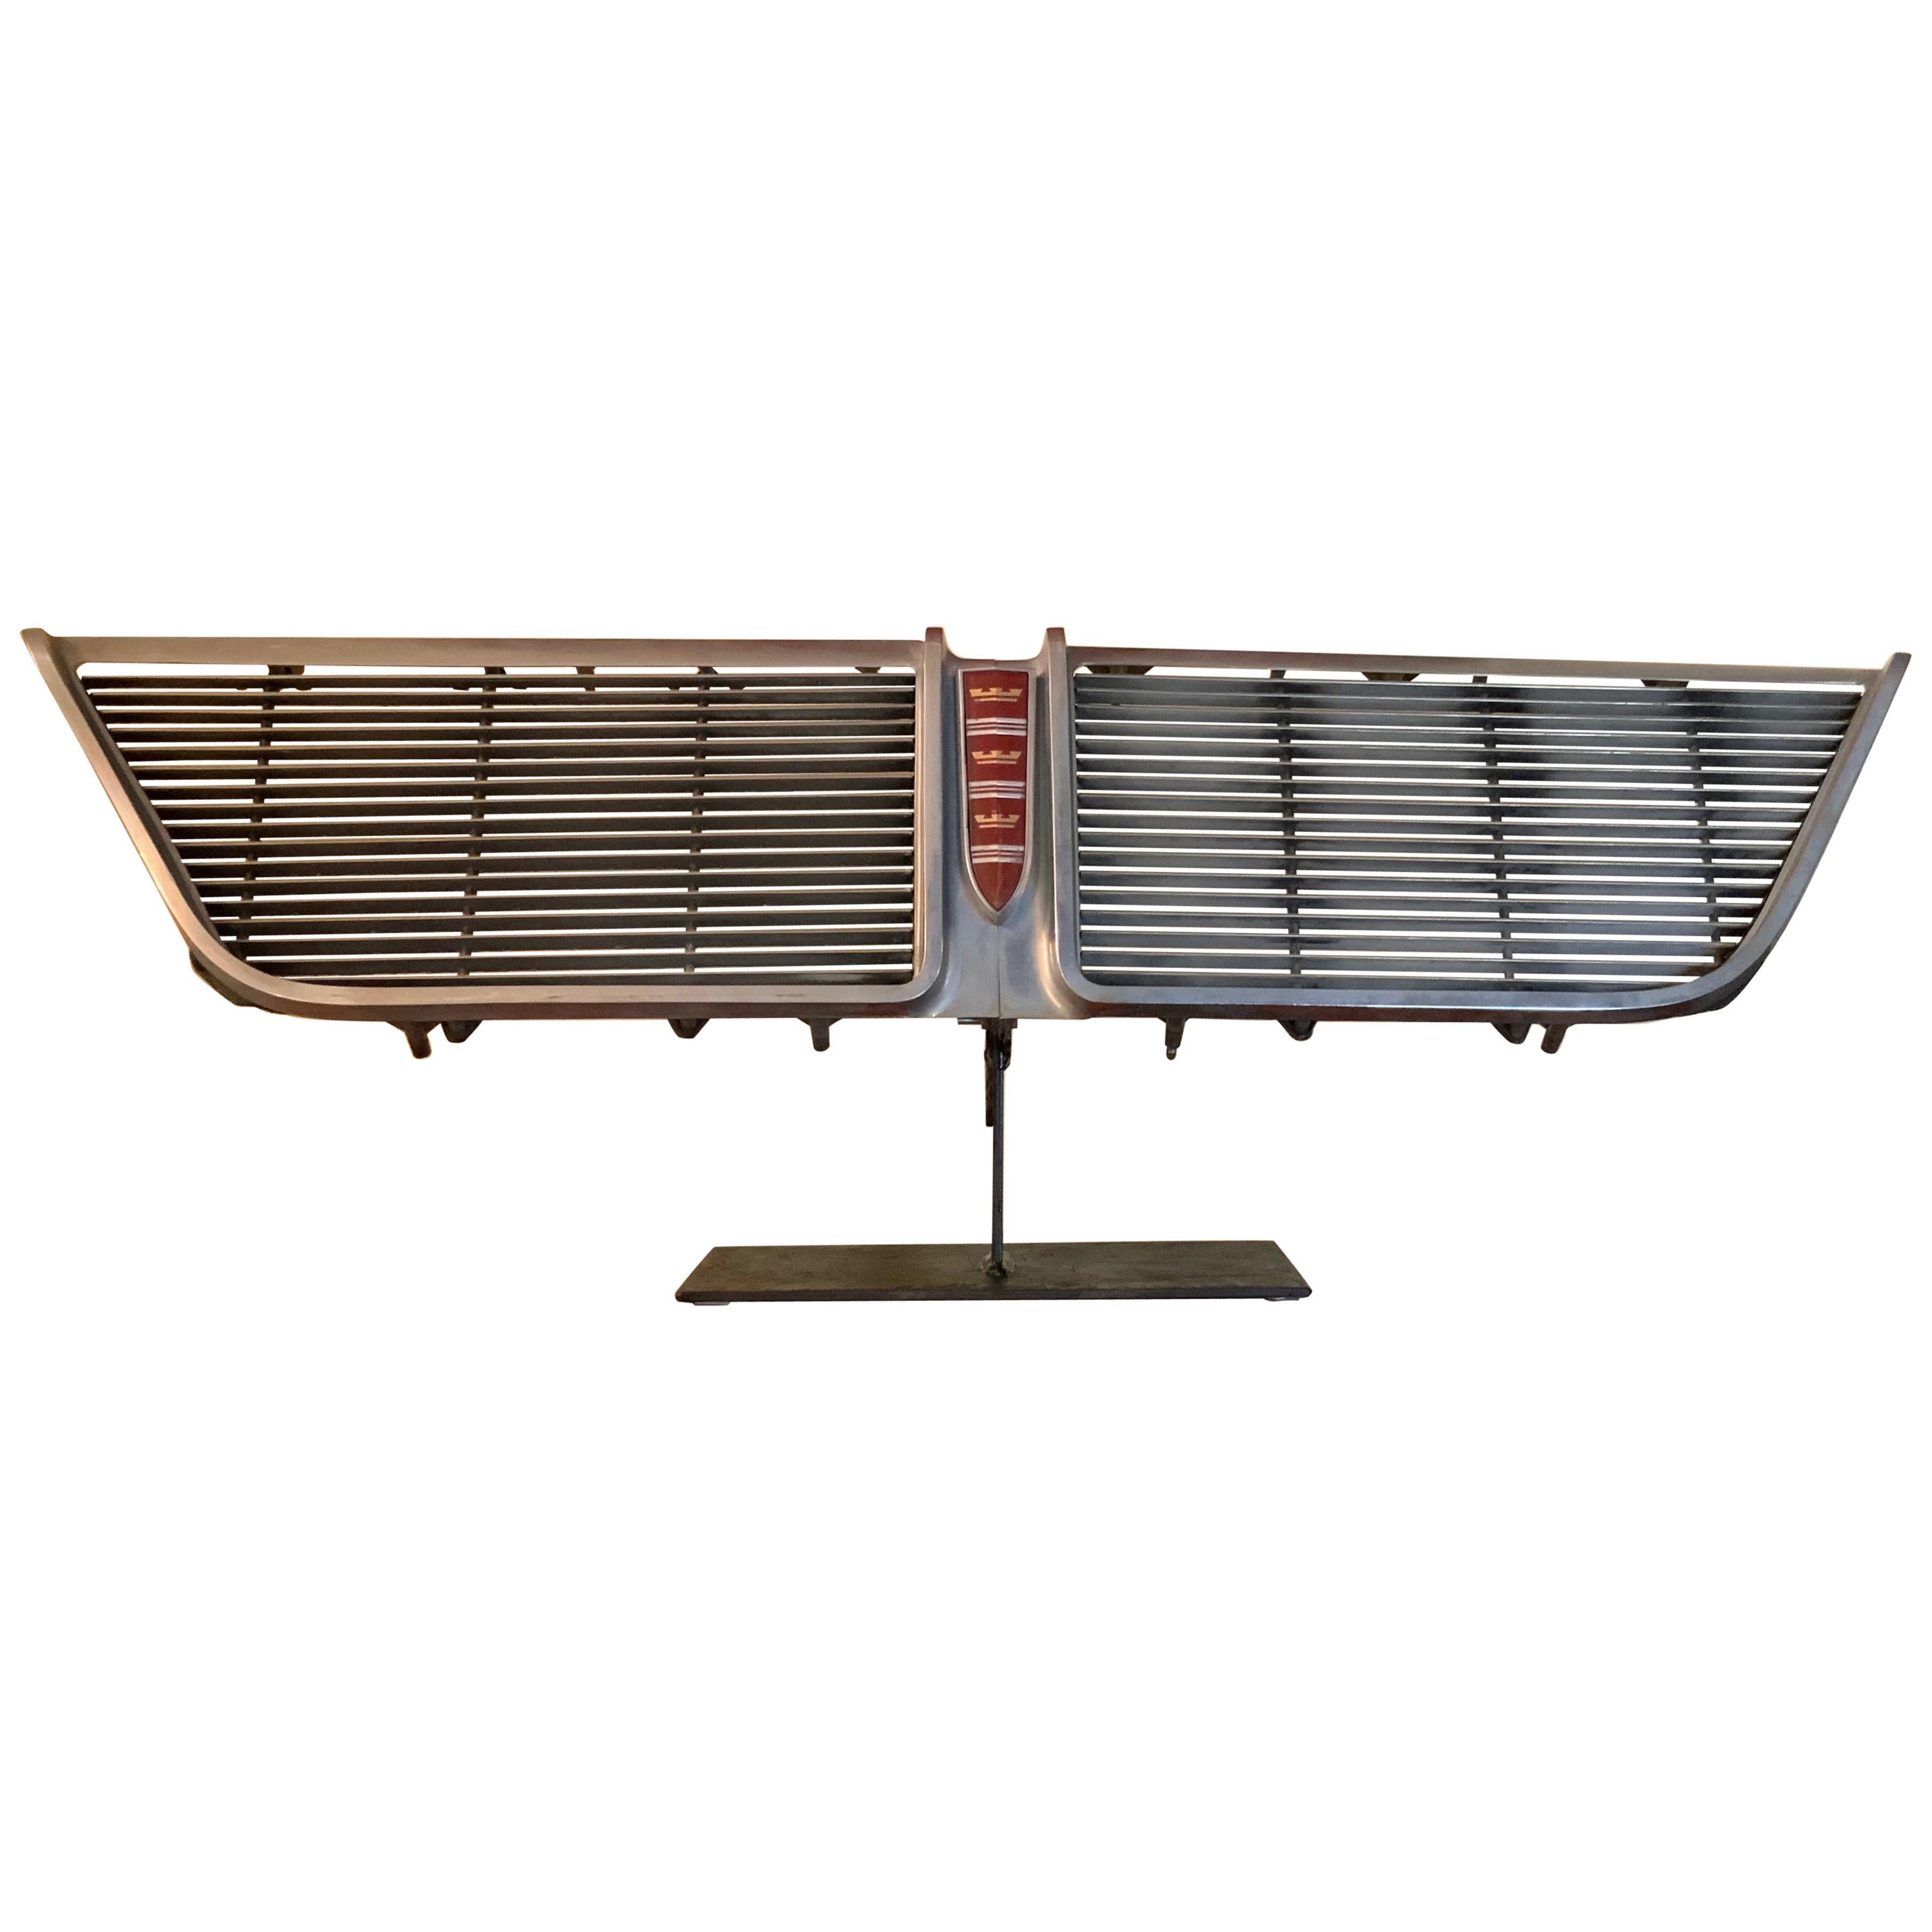 Original 1964 New Yorker Car Grill on Display For Sale